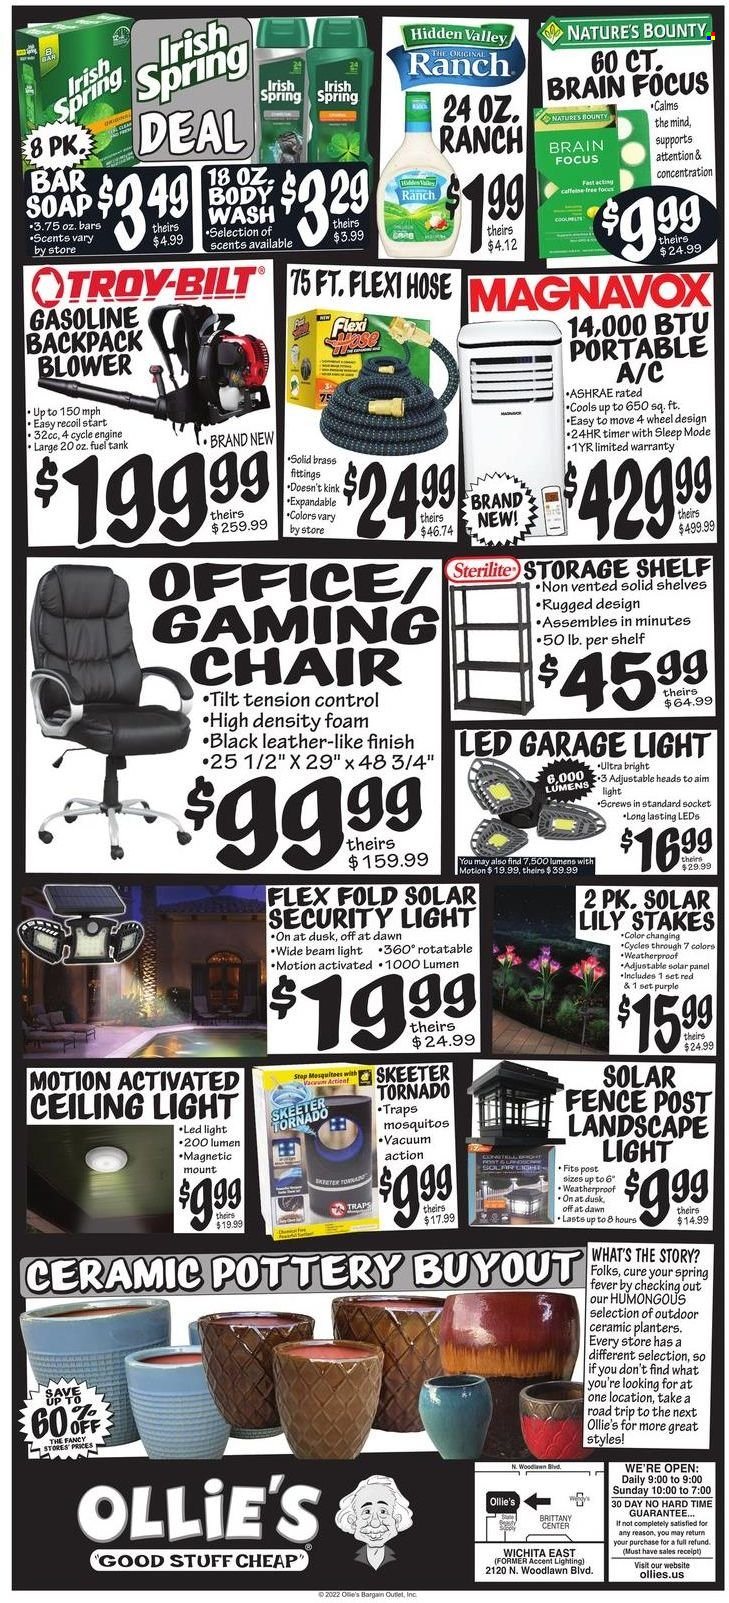 Ollie's Bargain Outlet ad  - 06.09.2022 - 07.09.2022.